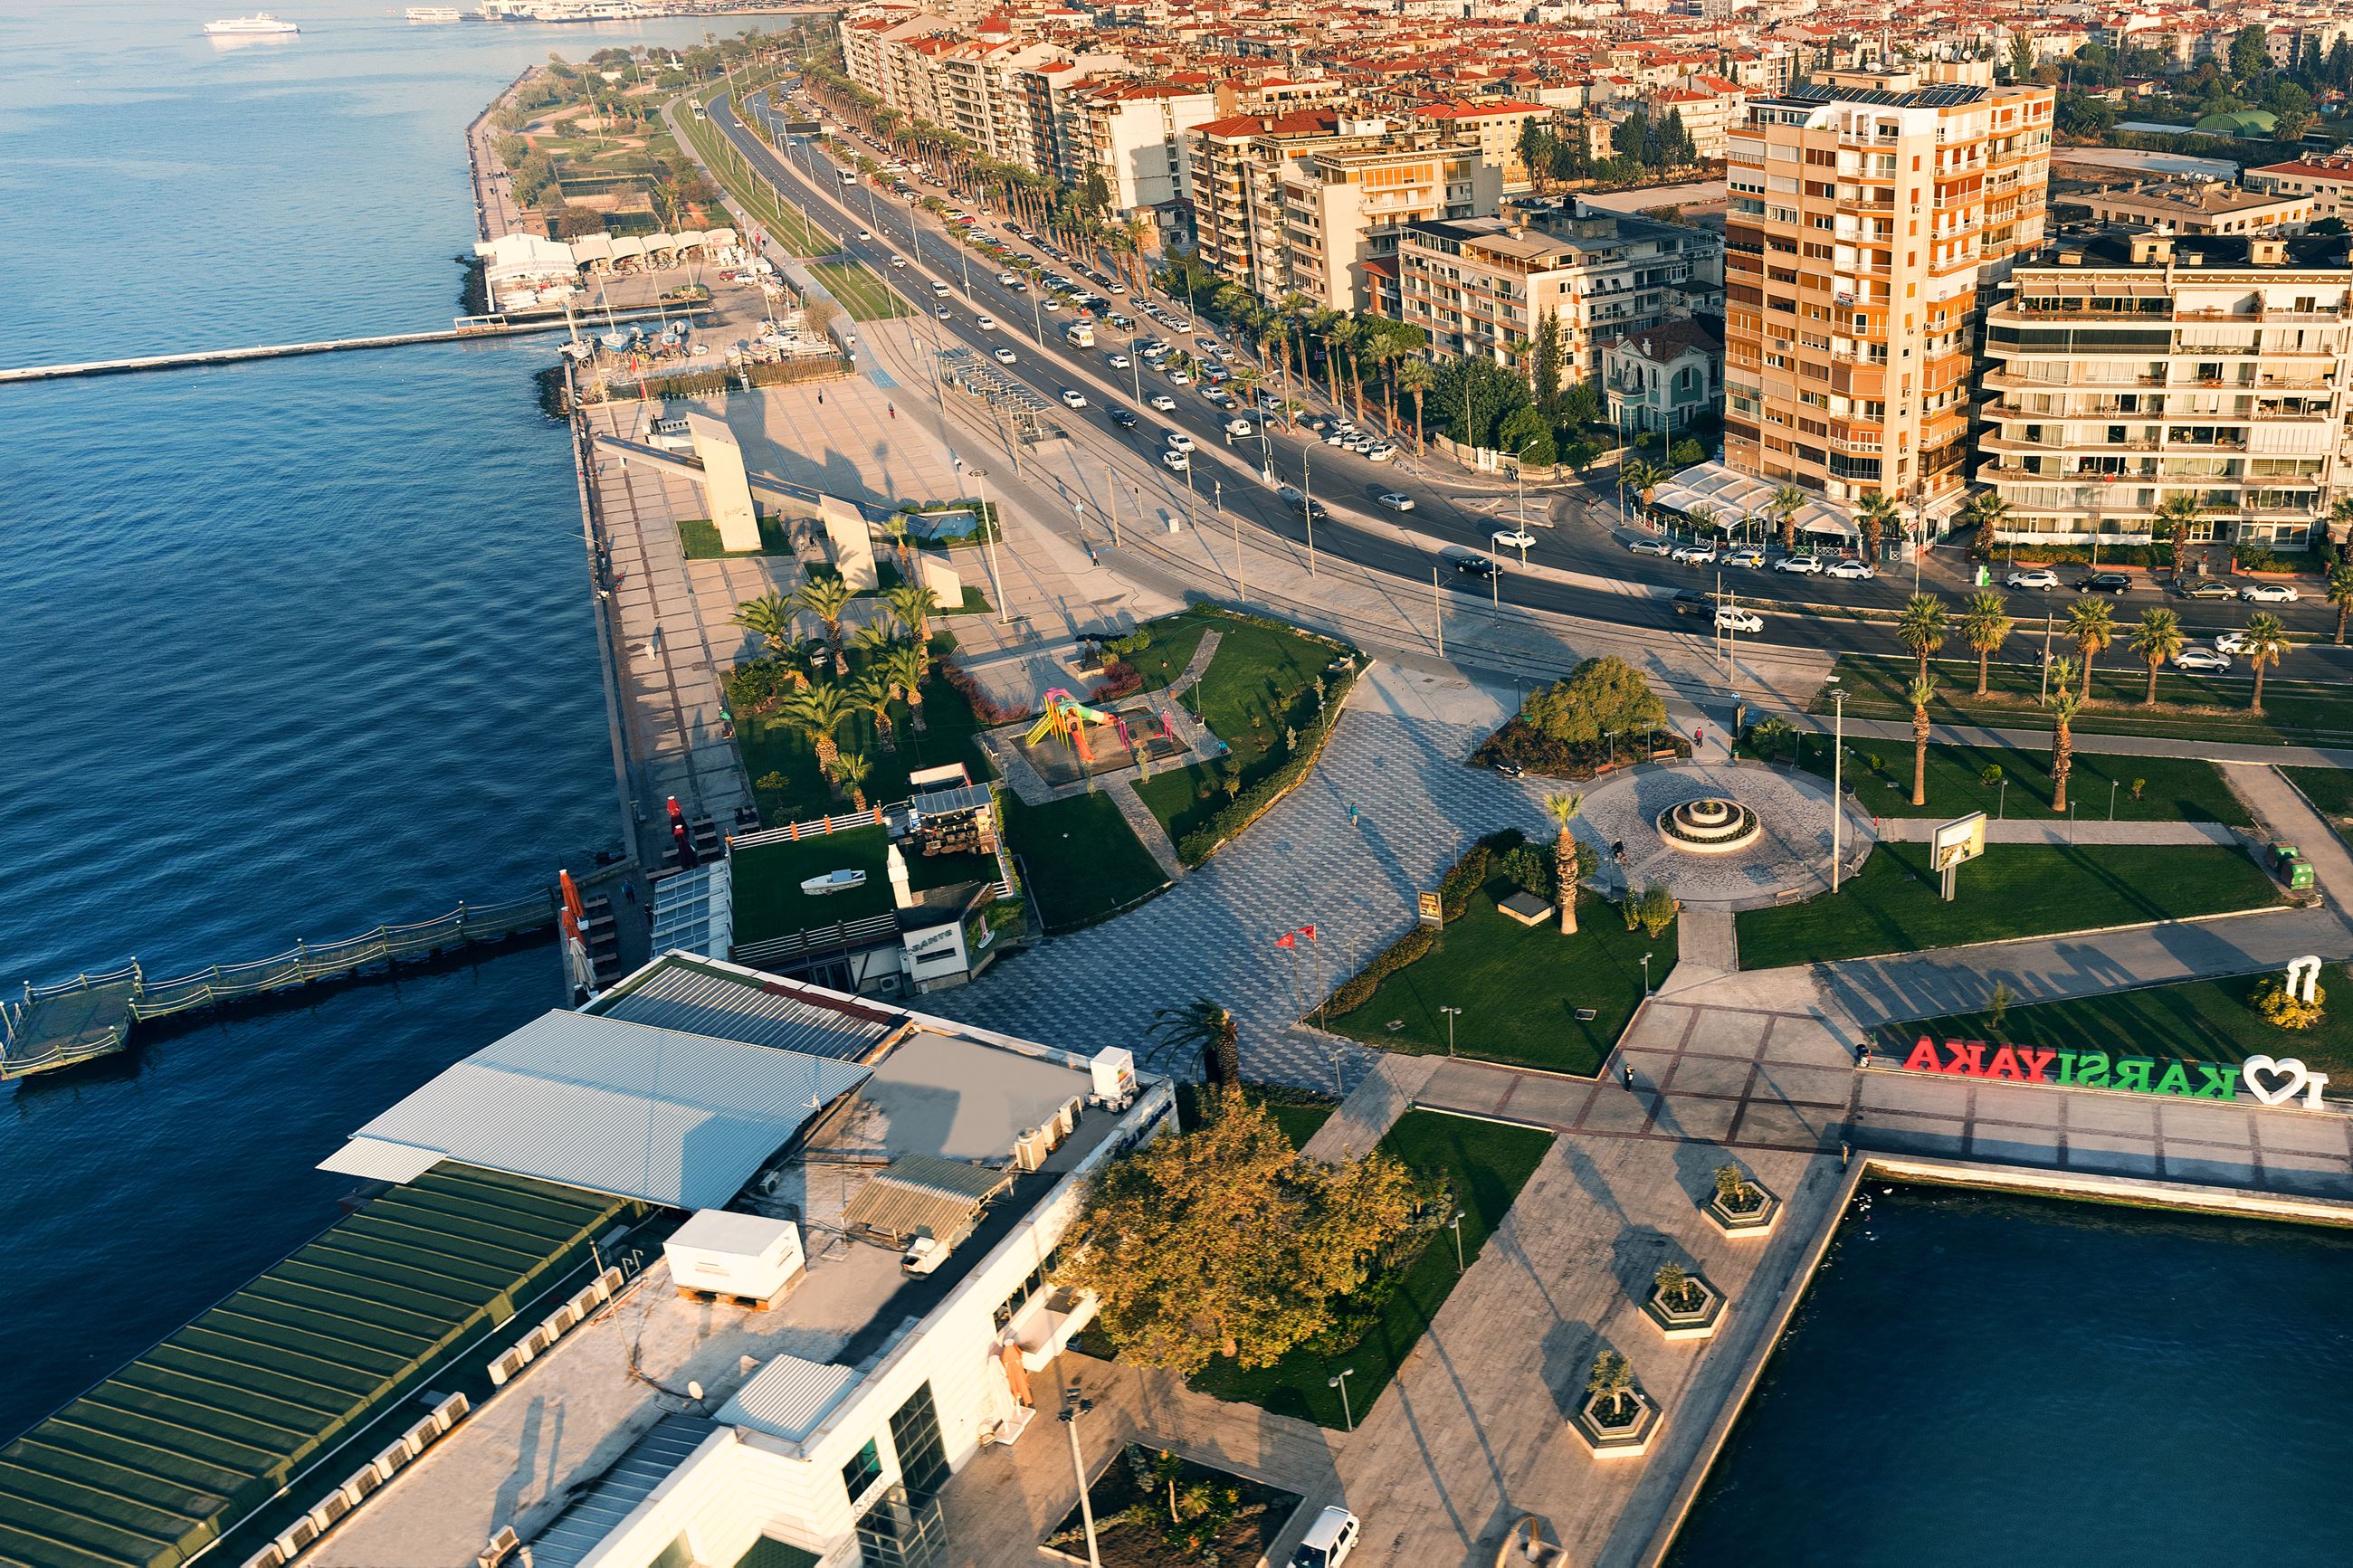 The city of Karsiyaka, Turkey, with blue harbor and downtown area.